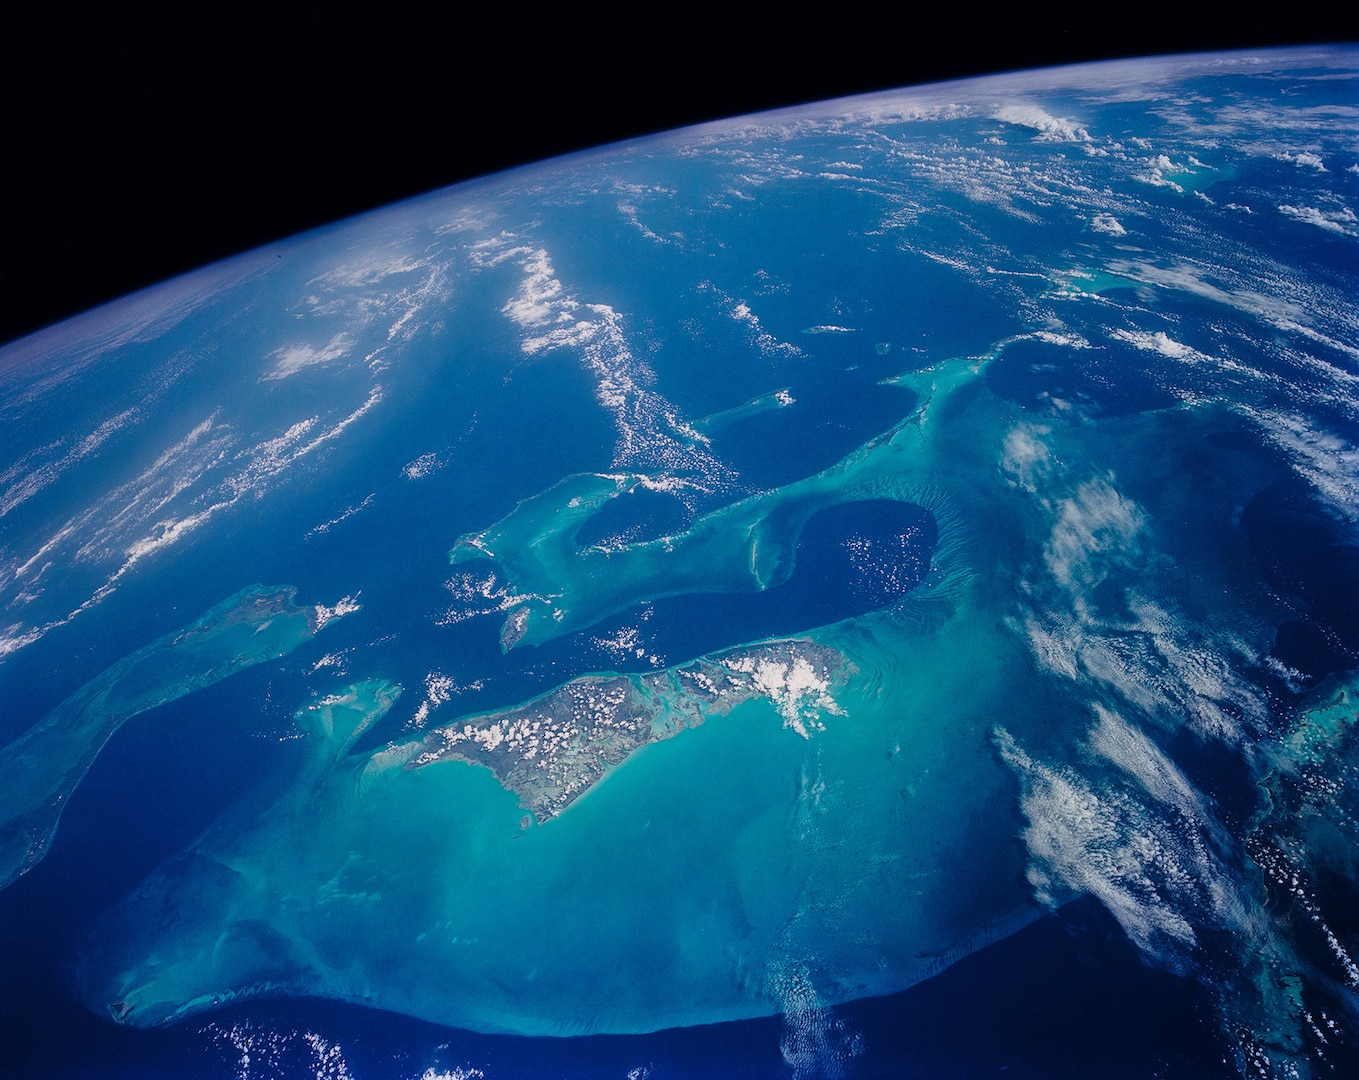 The light blue shallow water platforms of the Bahamas, which are separated by very deep dark blue channels, make for a striking scene. The Bahamas are one of the few regions where calcium carbonate precipitates directly out of the water, as the mineral aragonite, to form the coral reef islands.